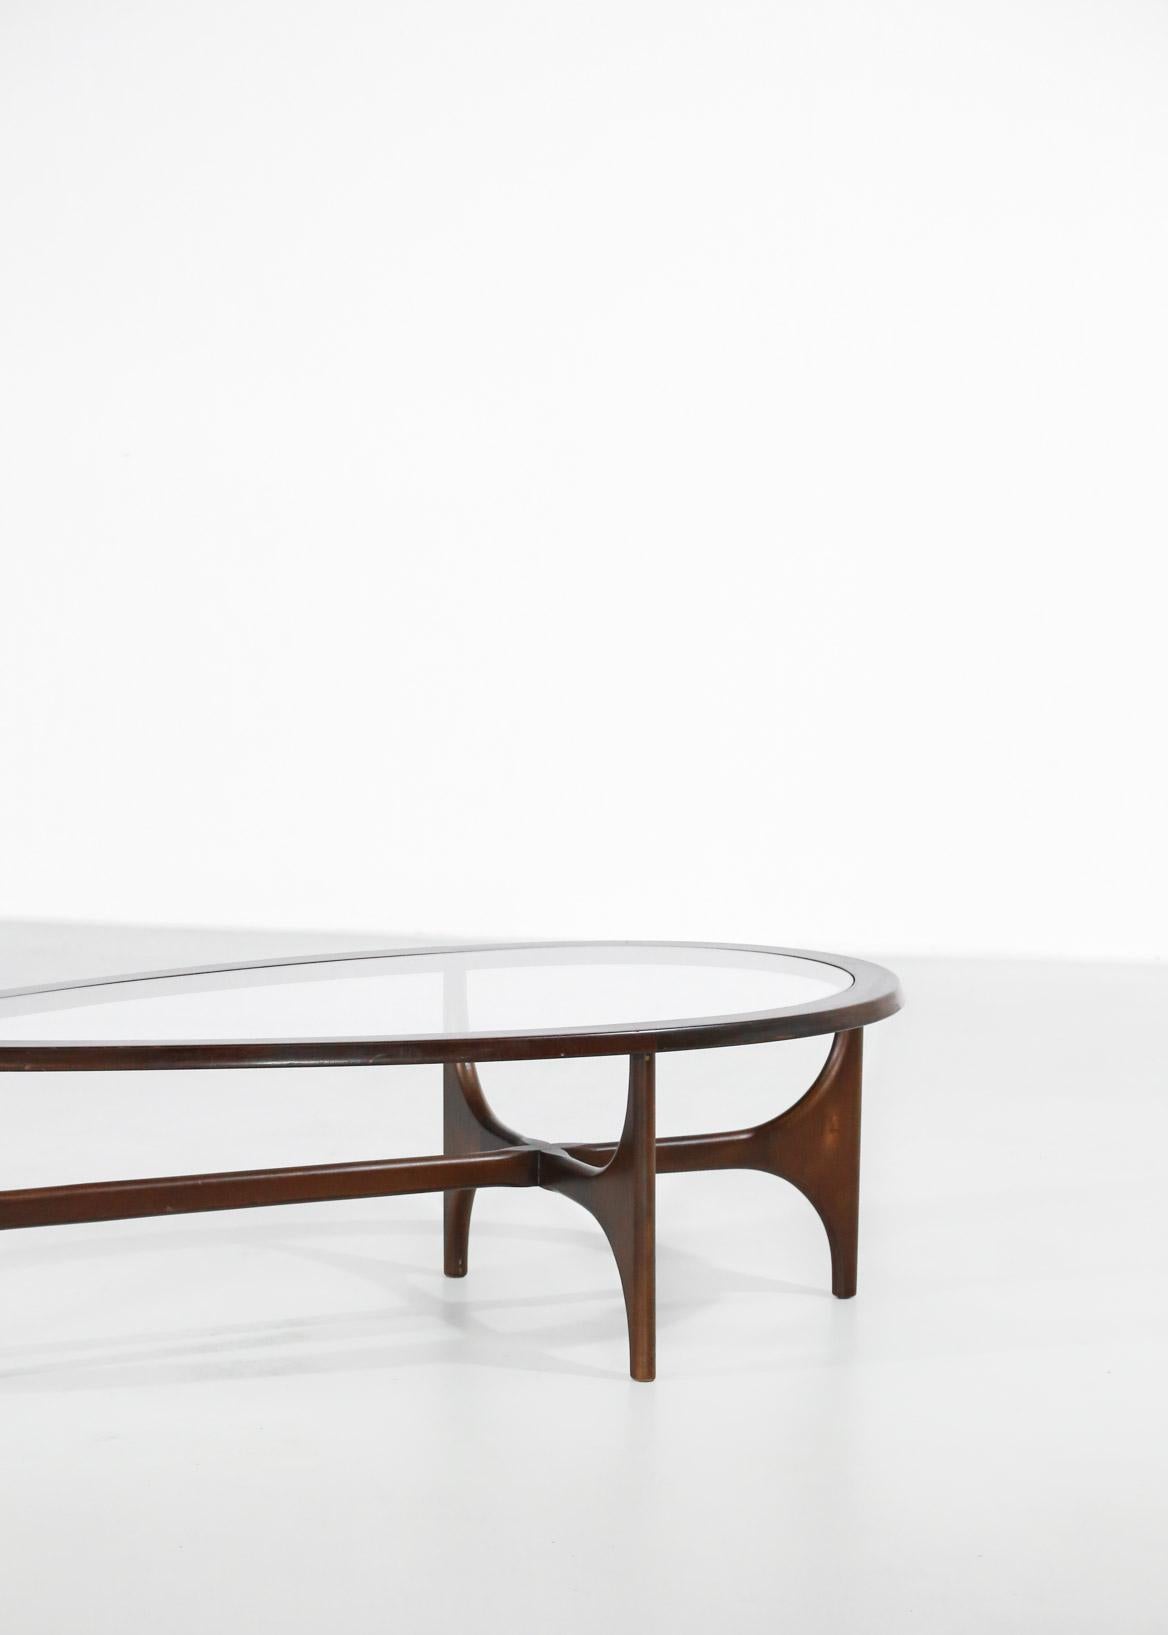 20th Century Design Coffee Table Stateroom by Stonehill, 1960s